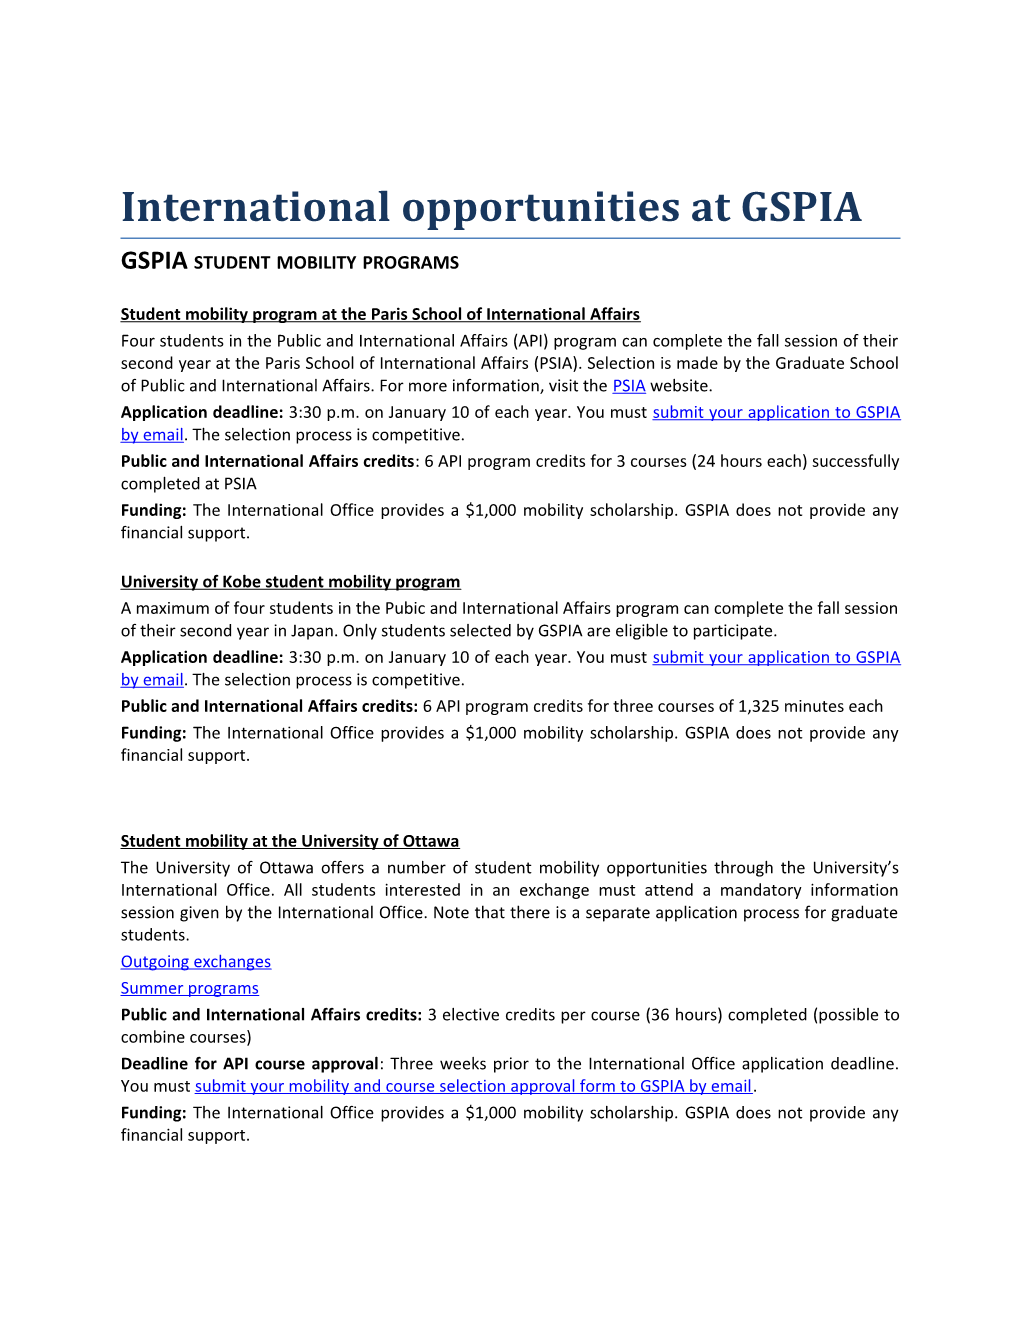 GSPIA Student Mobility Programs